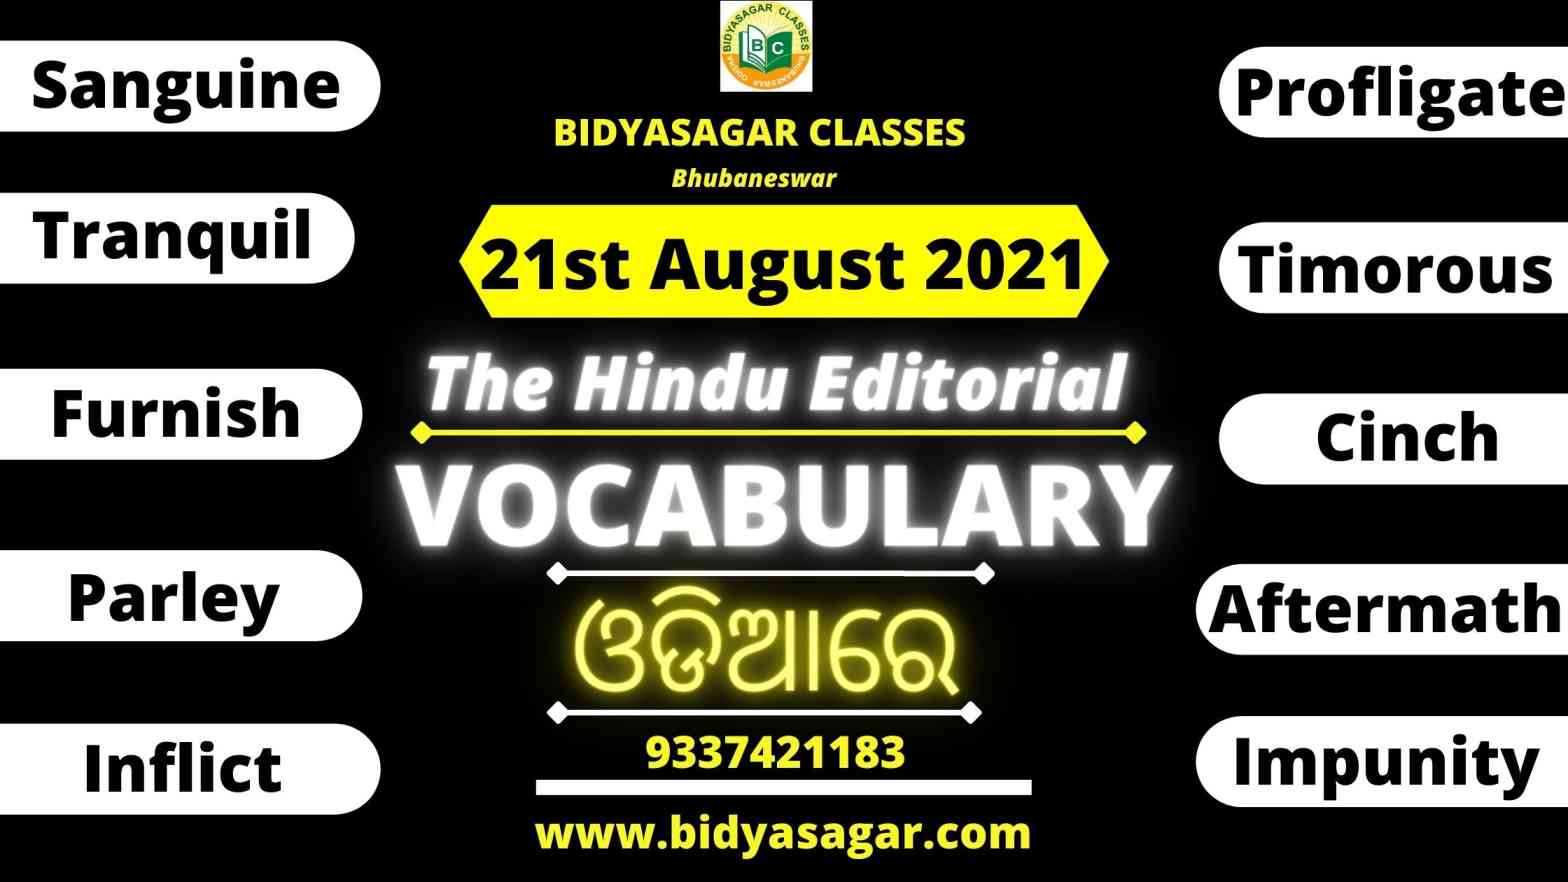 The Hindu Editorial Vocabulary of 21st August 2021